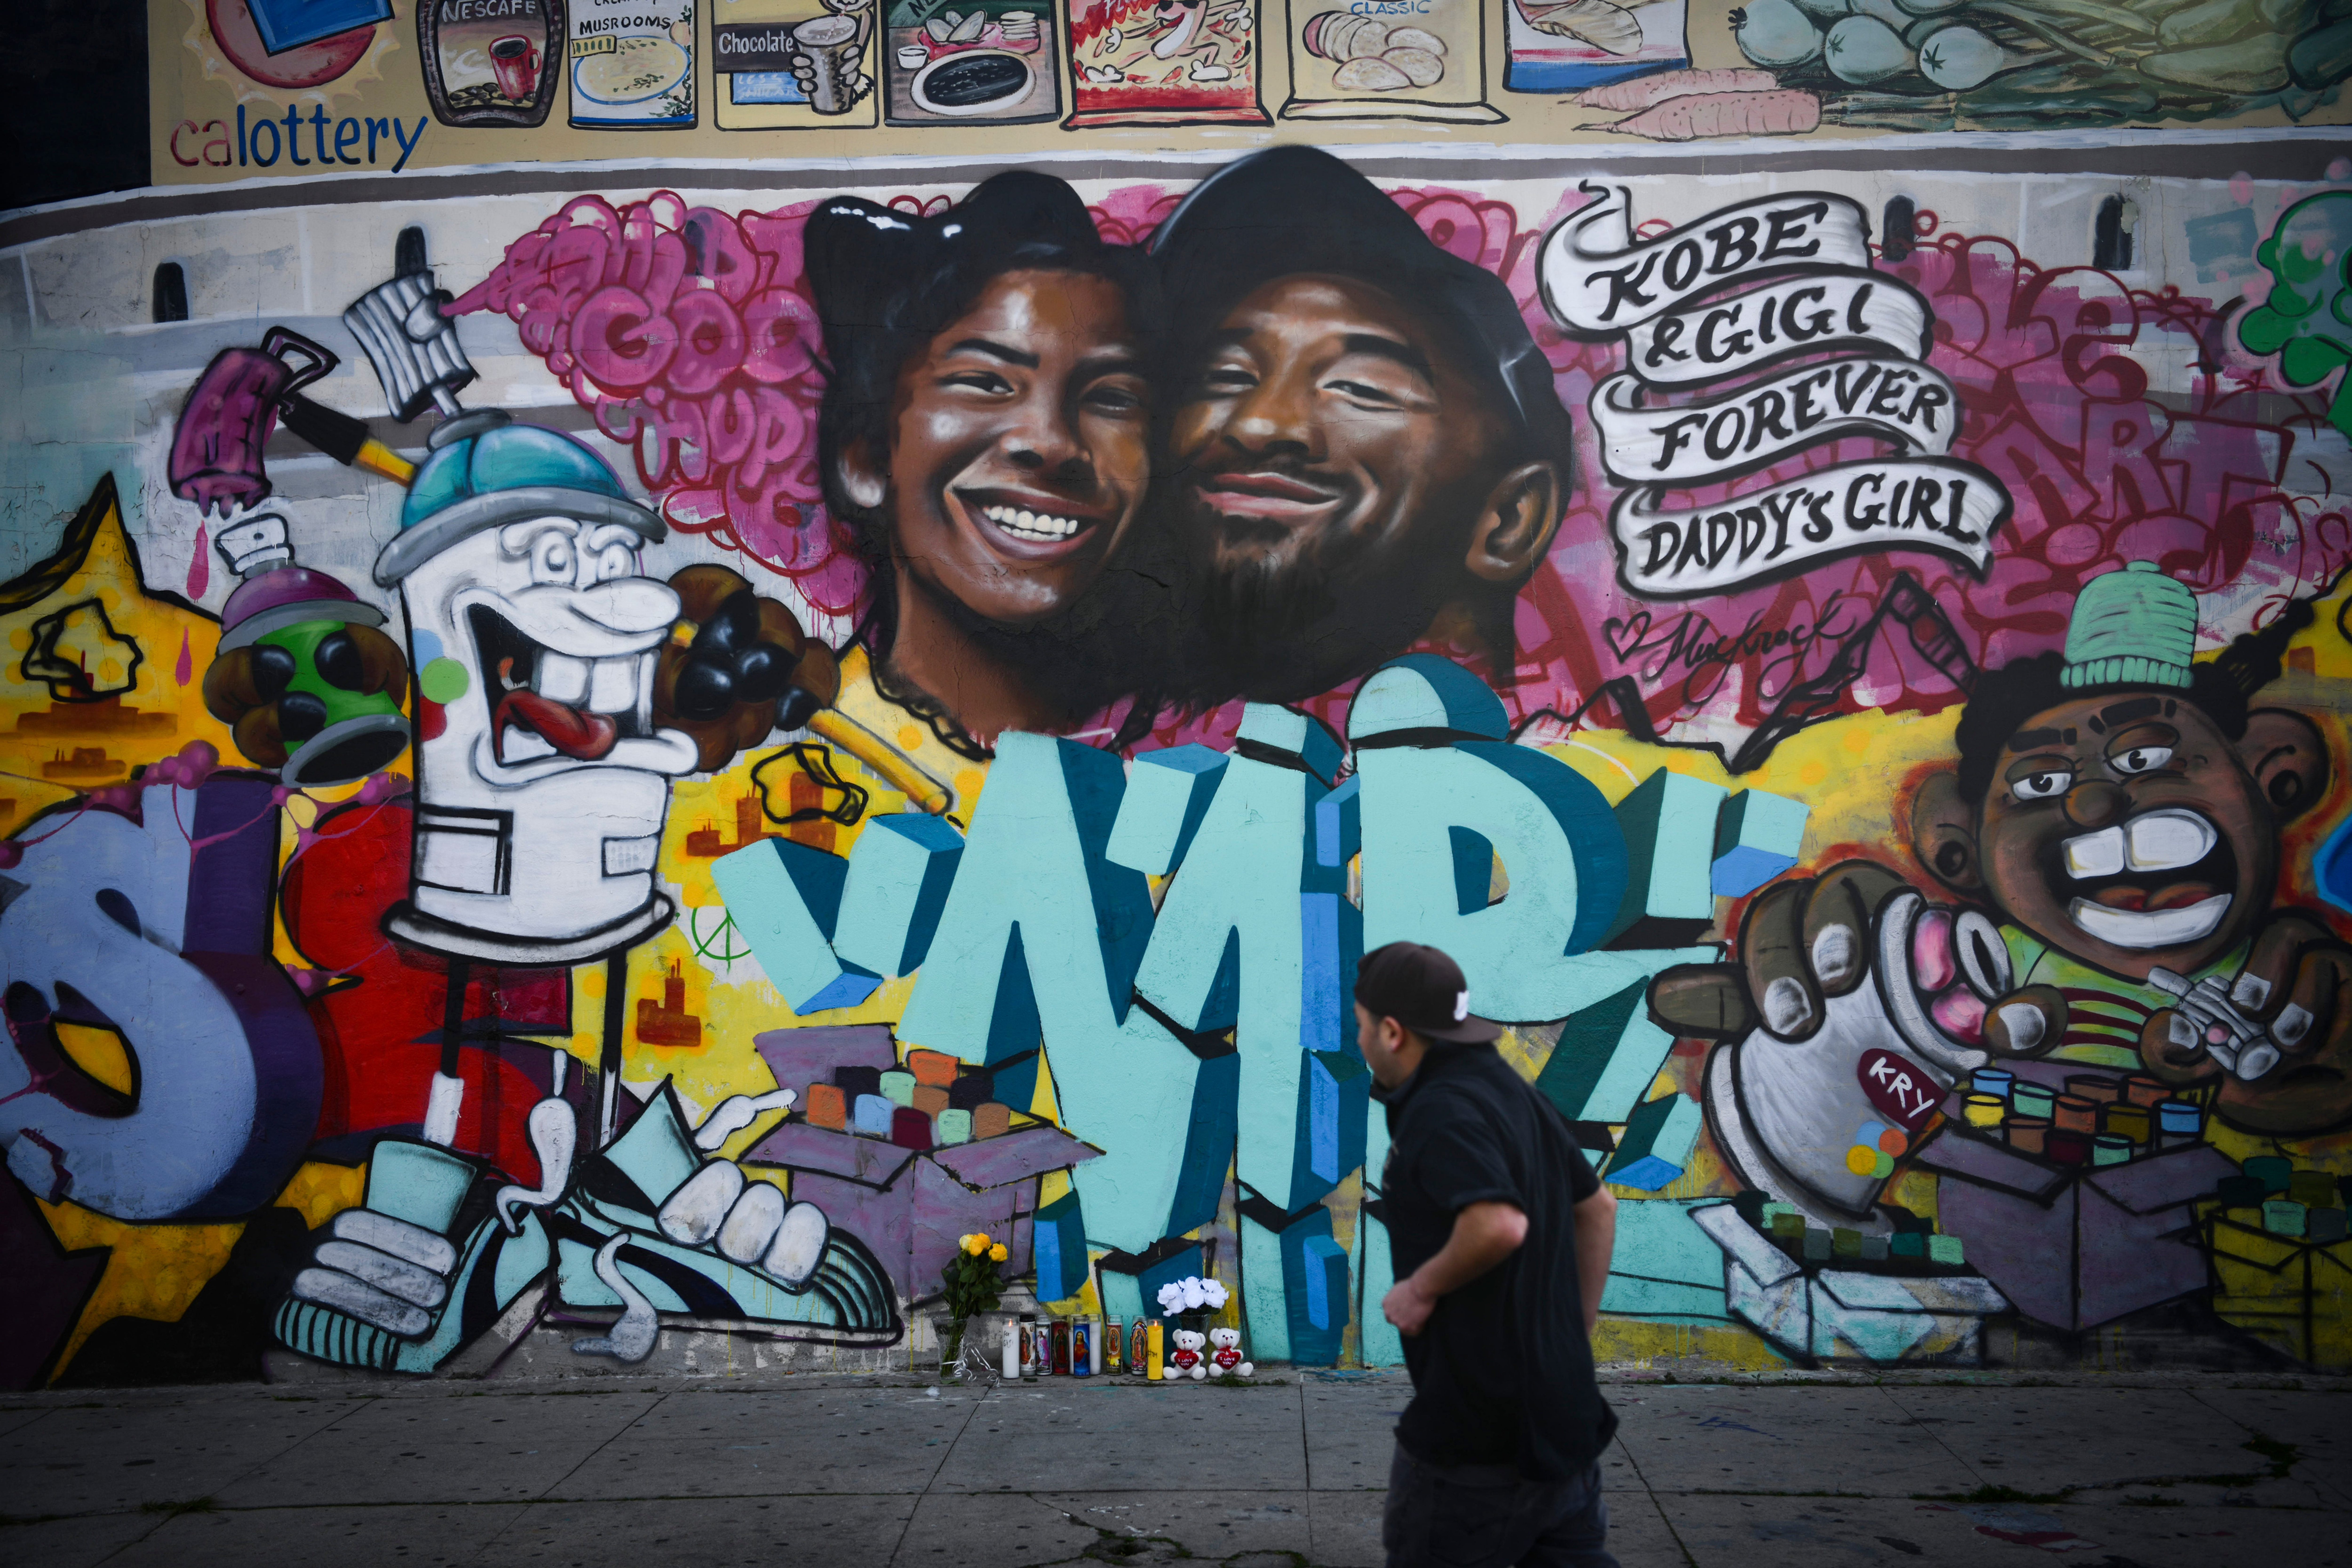 Iconic mural of Kobe and Gianna Bryant could be removed by month's end